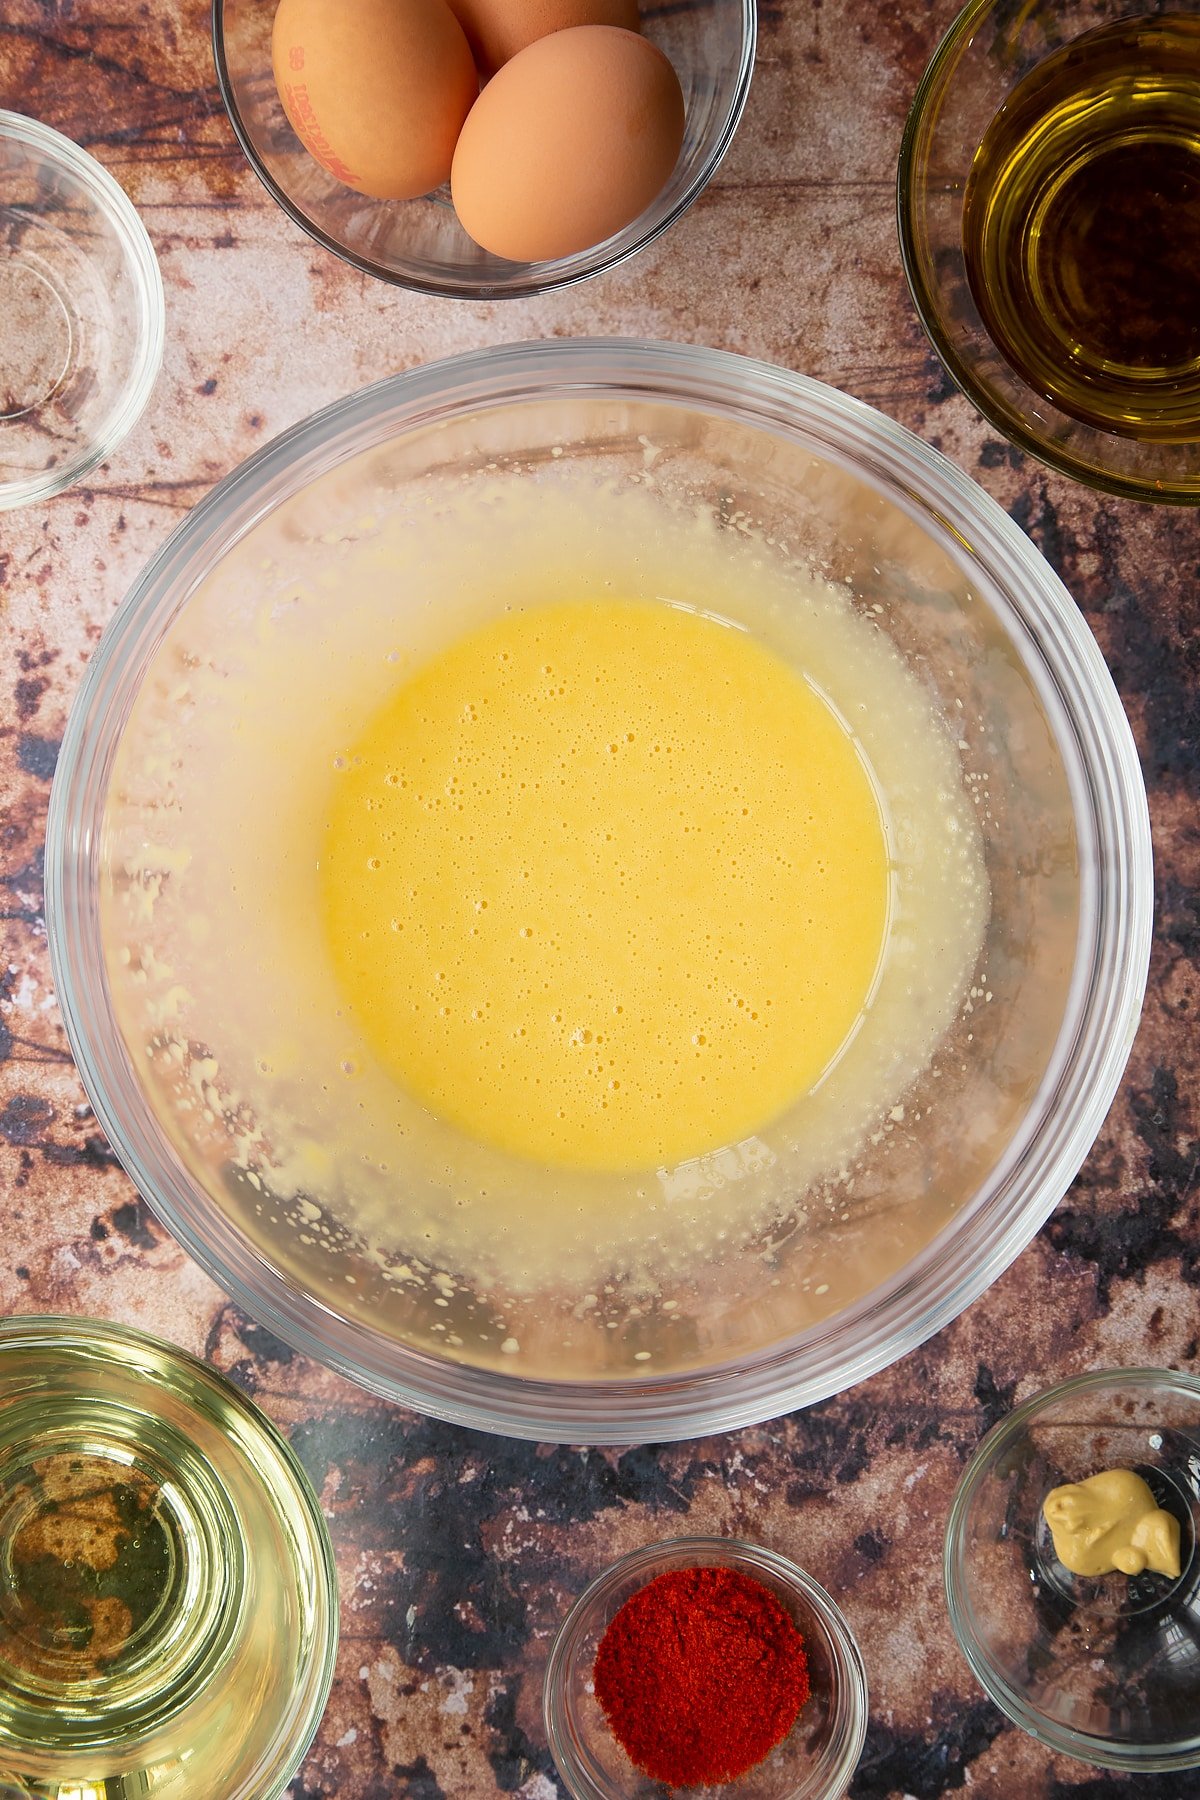 Vinegar, egg yolks and mustard whisked with oil in a glass mixing bowl. Ingredients to make paprika mayo surround the bowl.